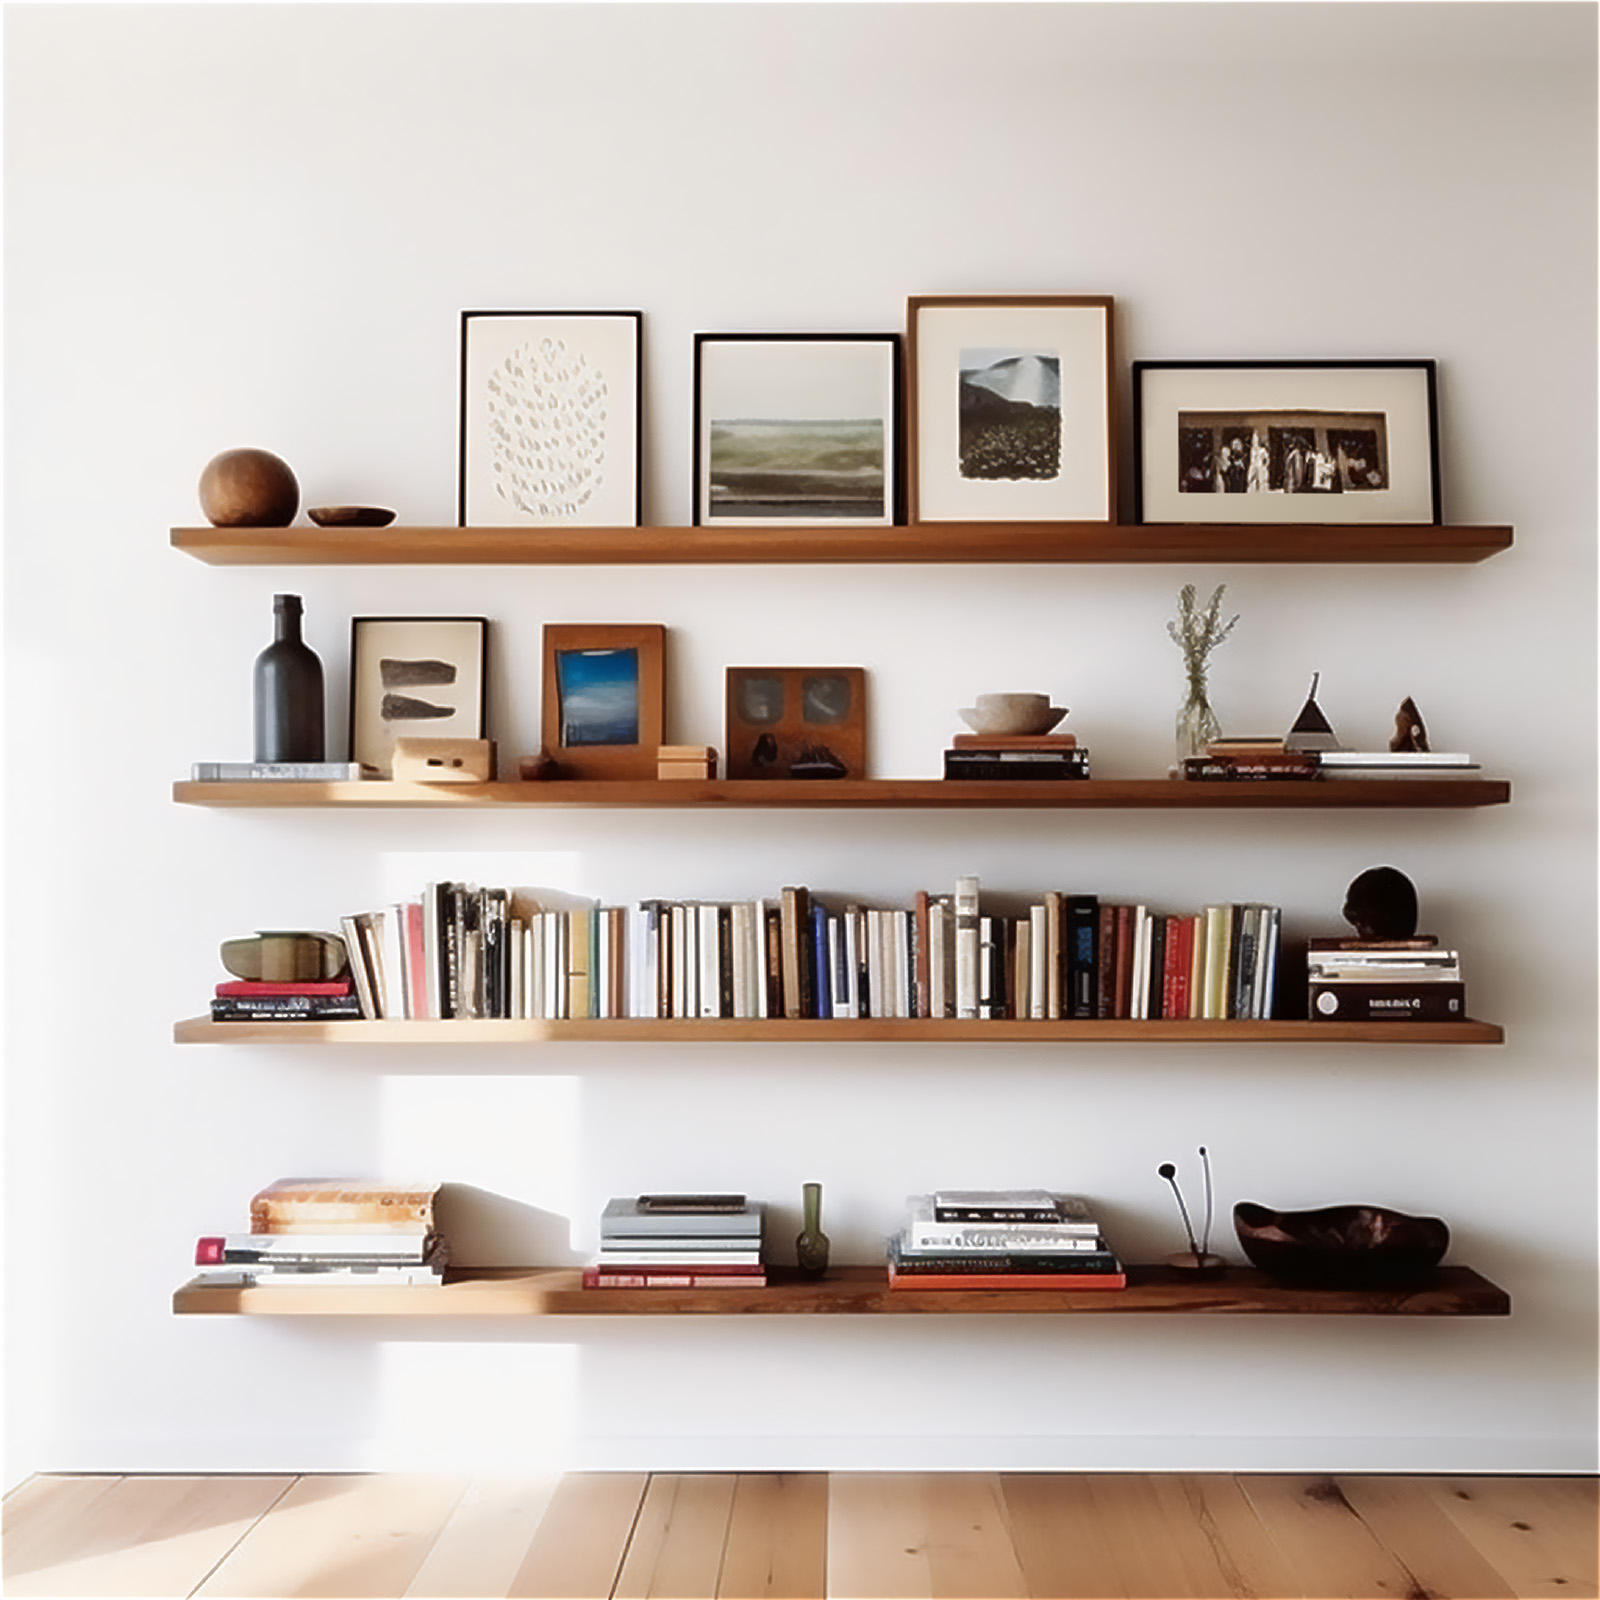 Photograph of a four-tier wall-mounted wooden bookshelf covered in various framed artwork, books, and other artifacts.